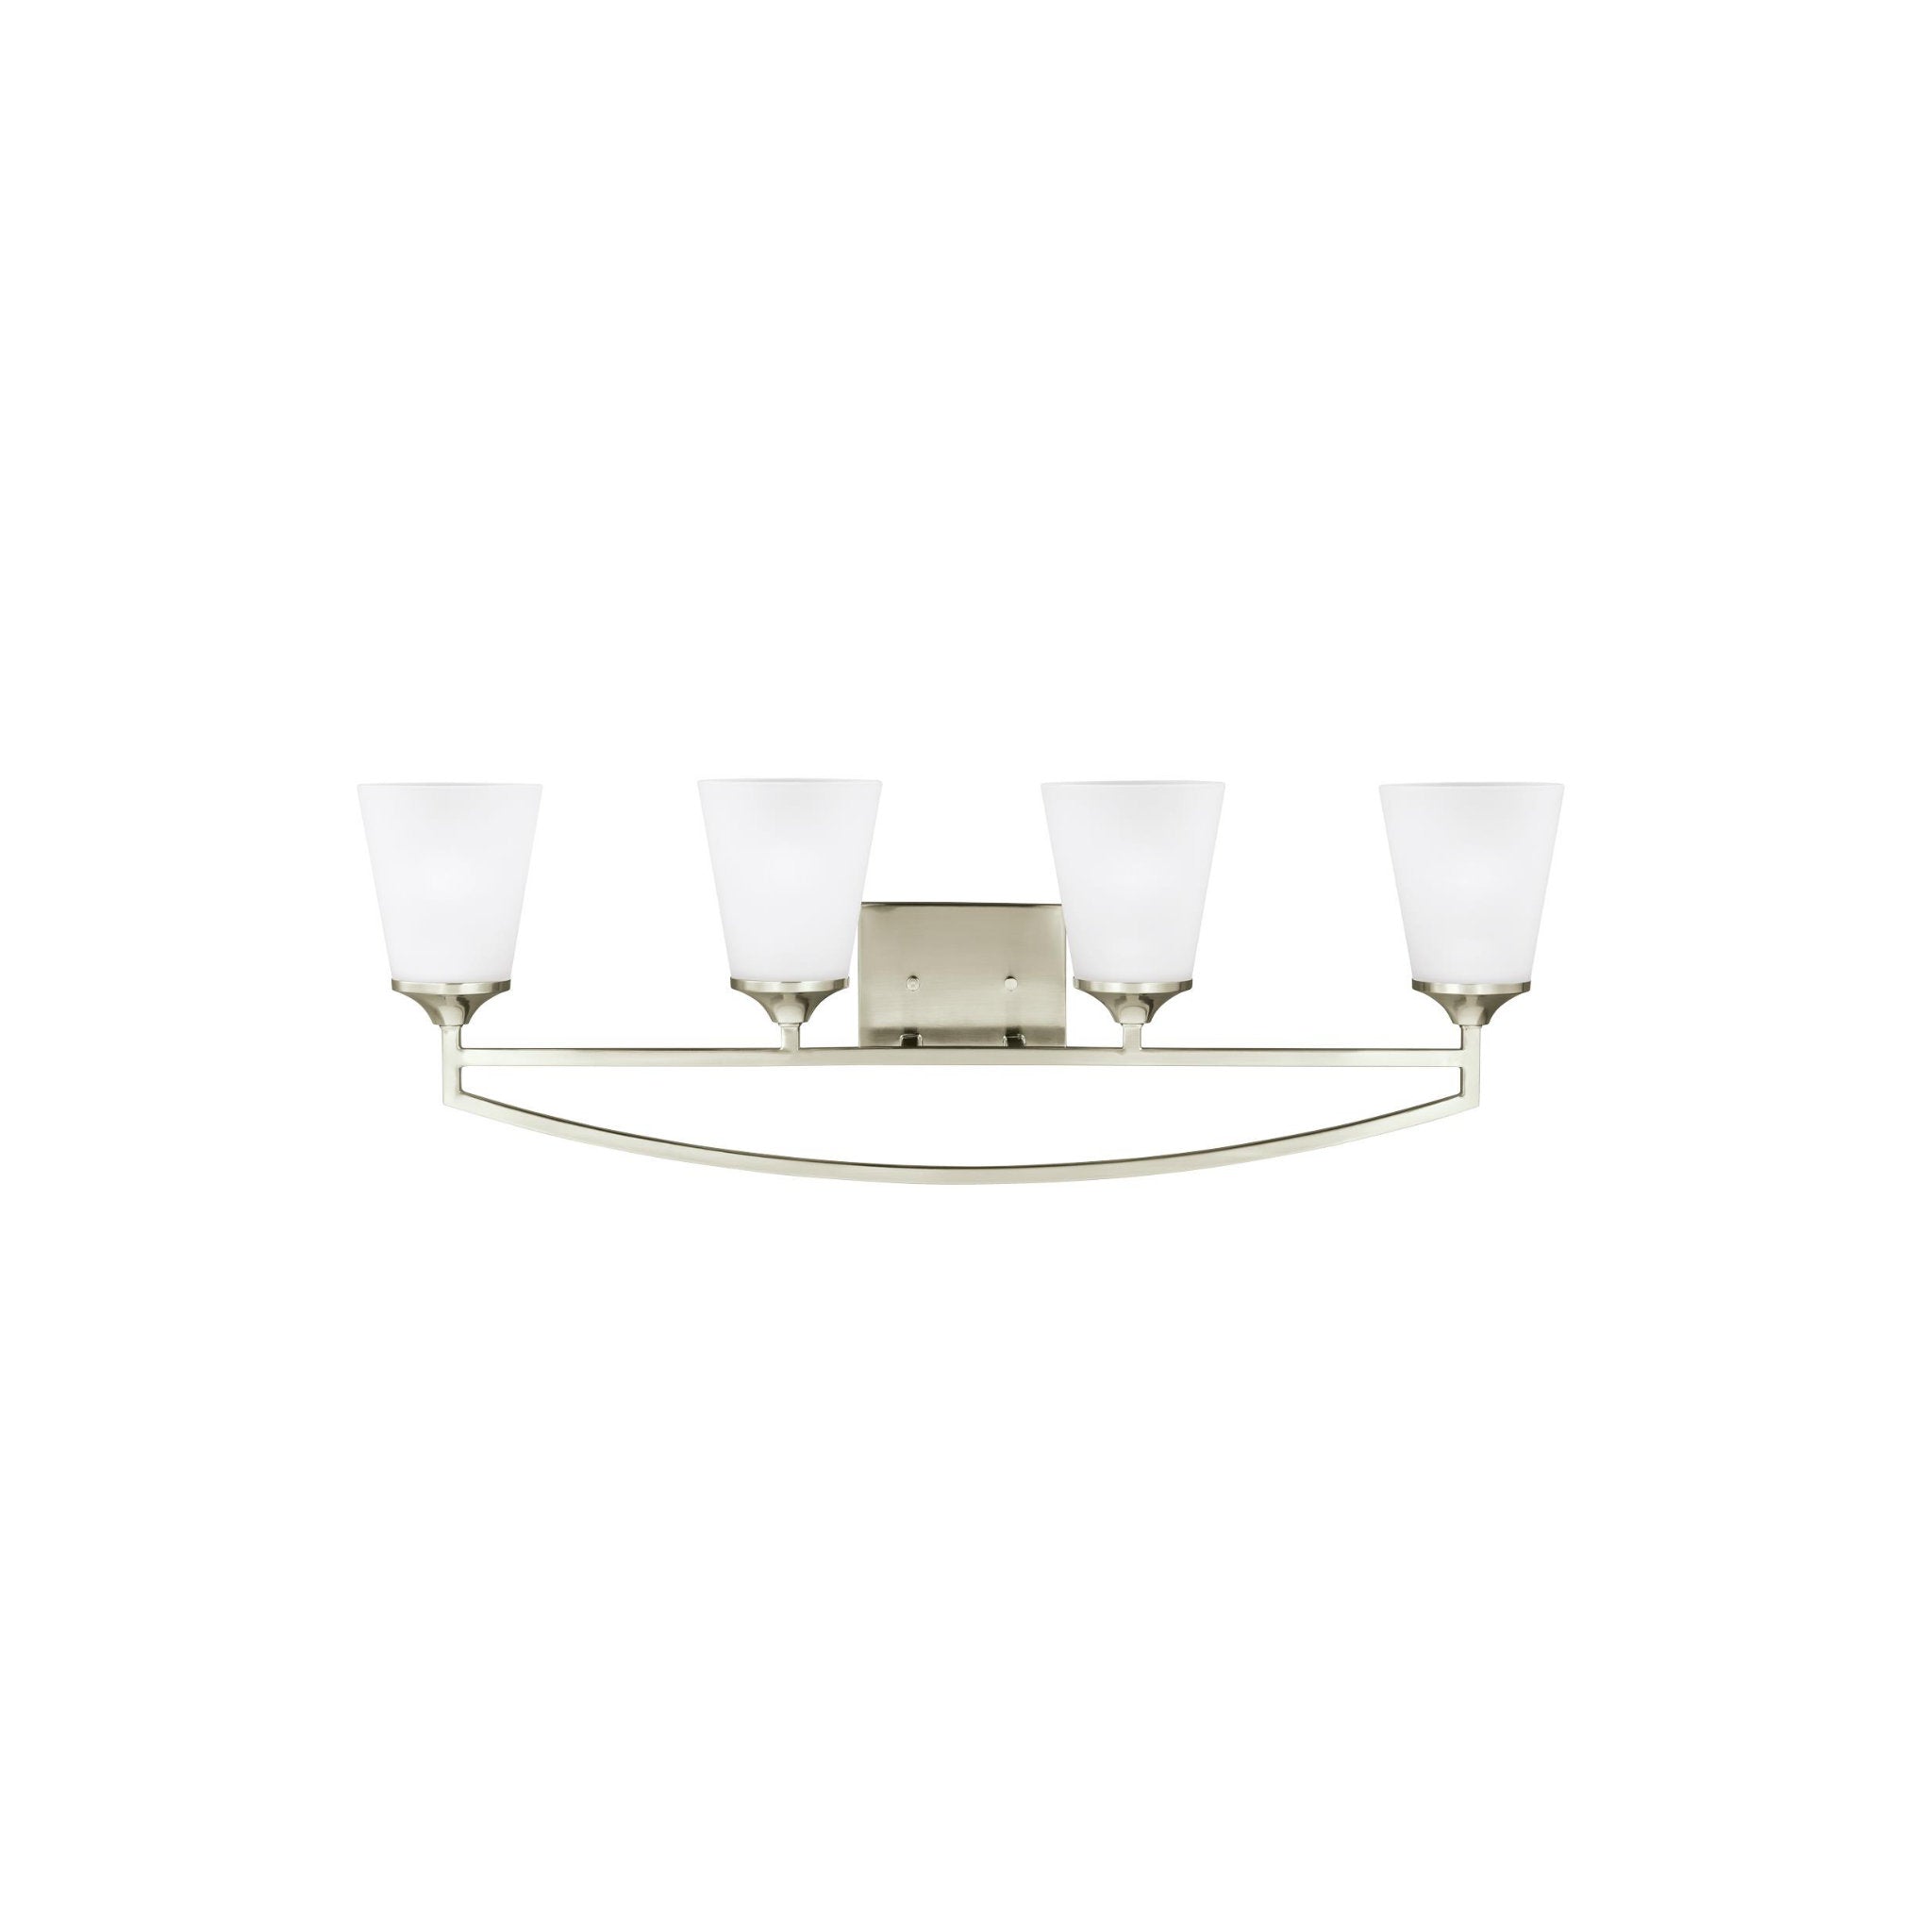 Hanford Four Light Wall / Bath LED Transitional Fixture 33.5" Width 11.25" Height Steel Round Satin Etched Shade in Brushed Nickel